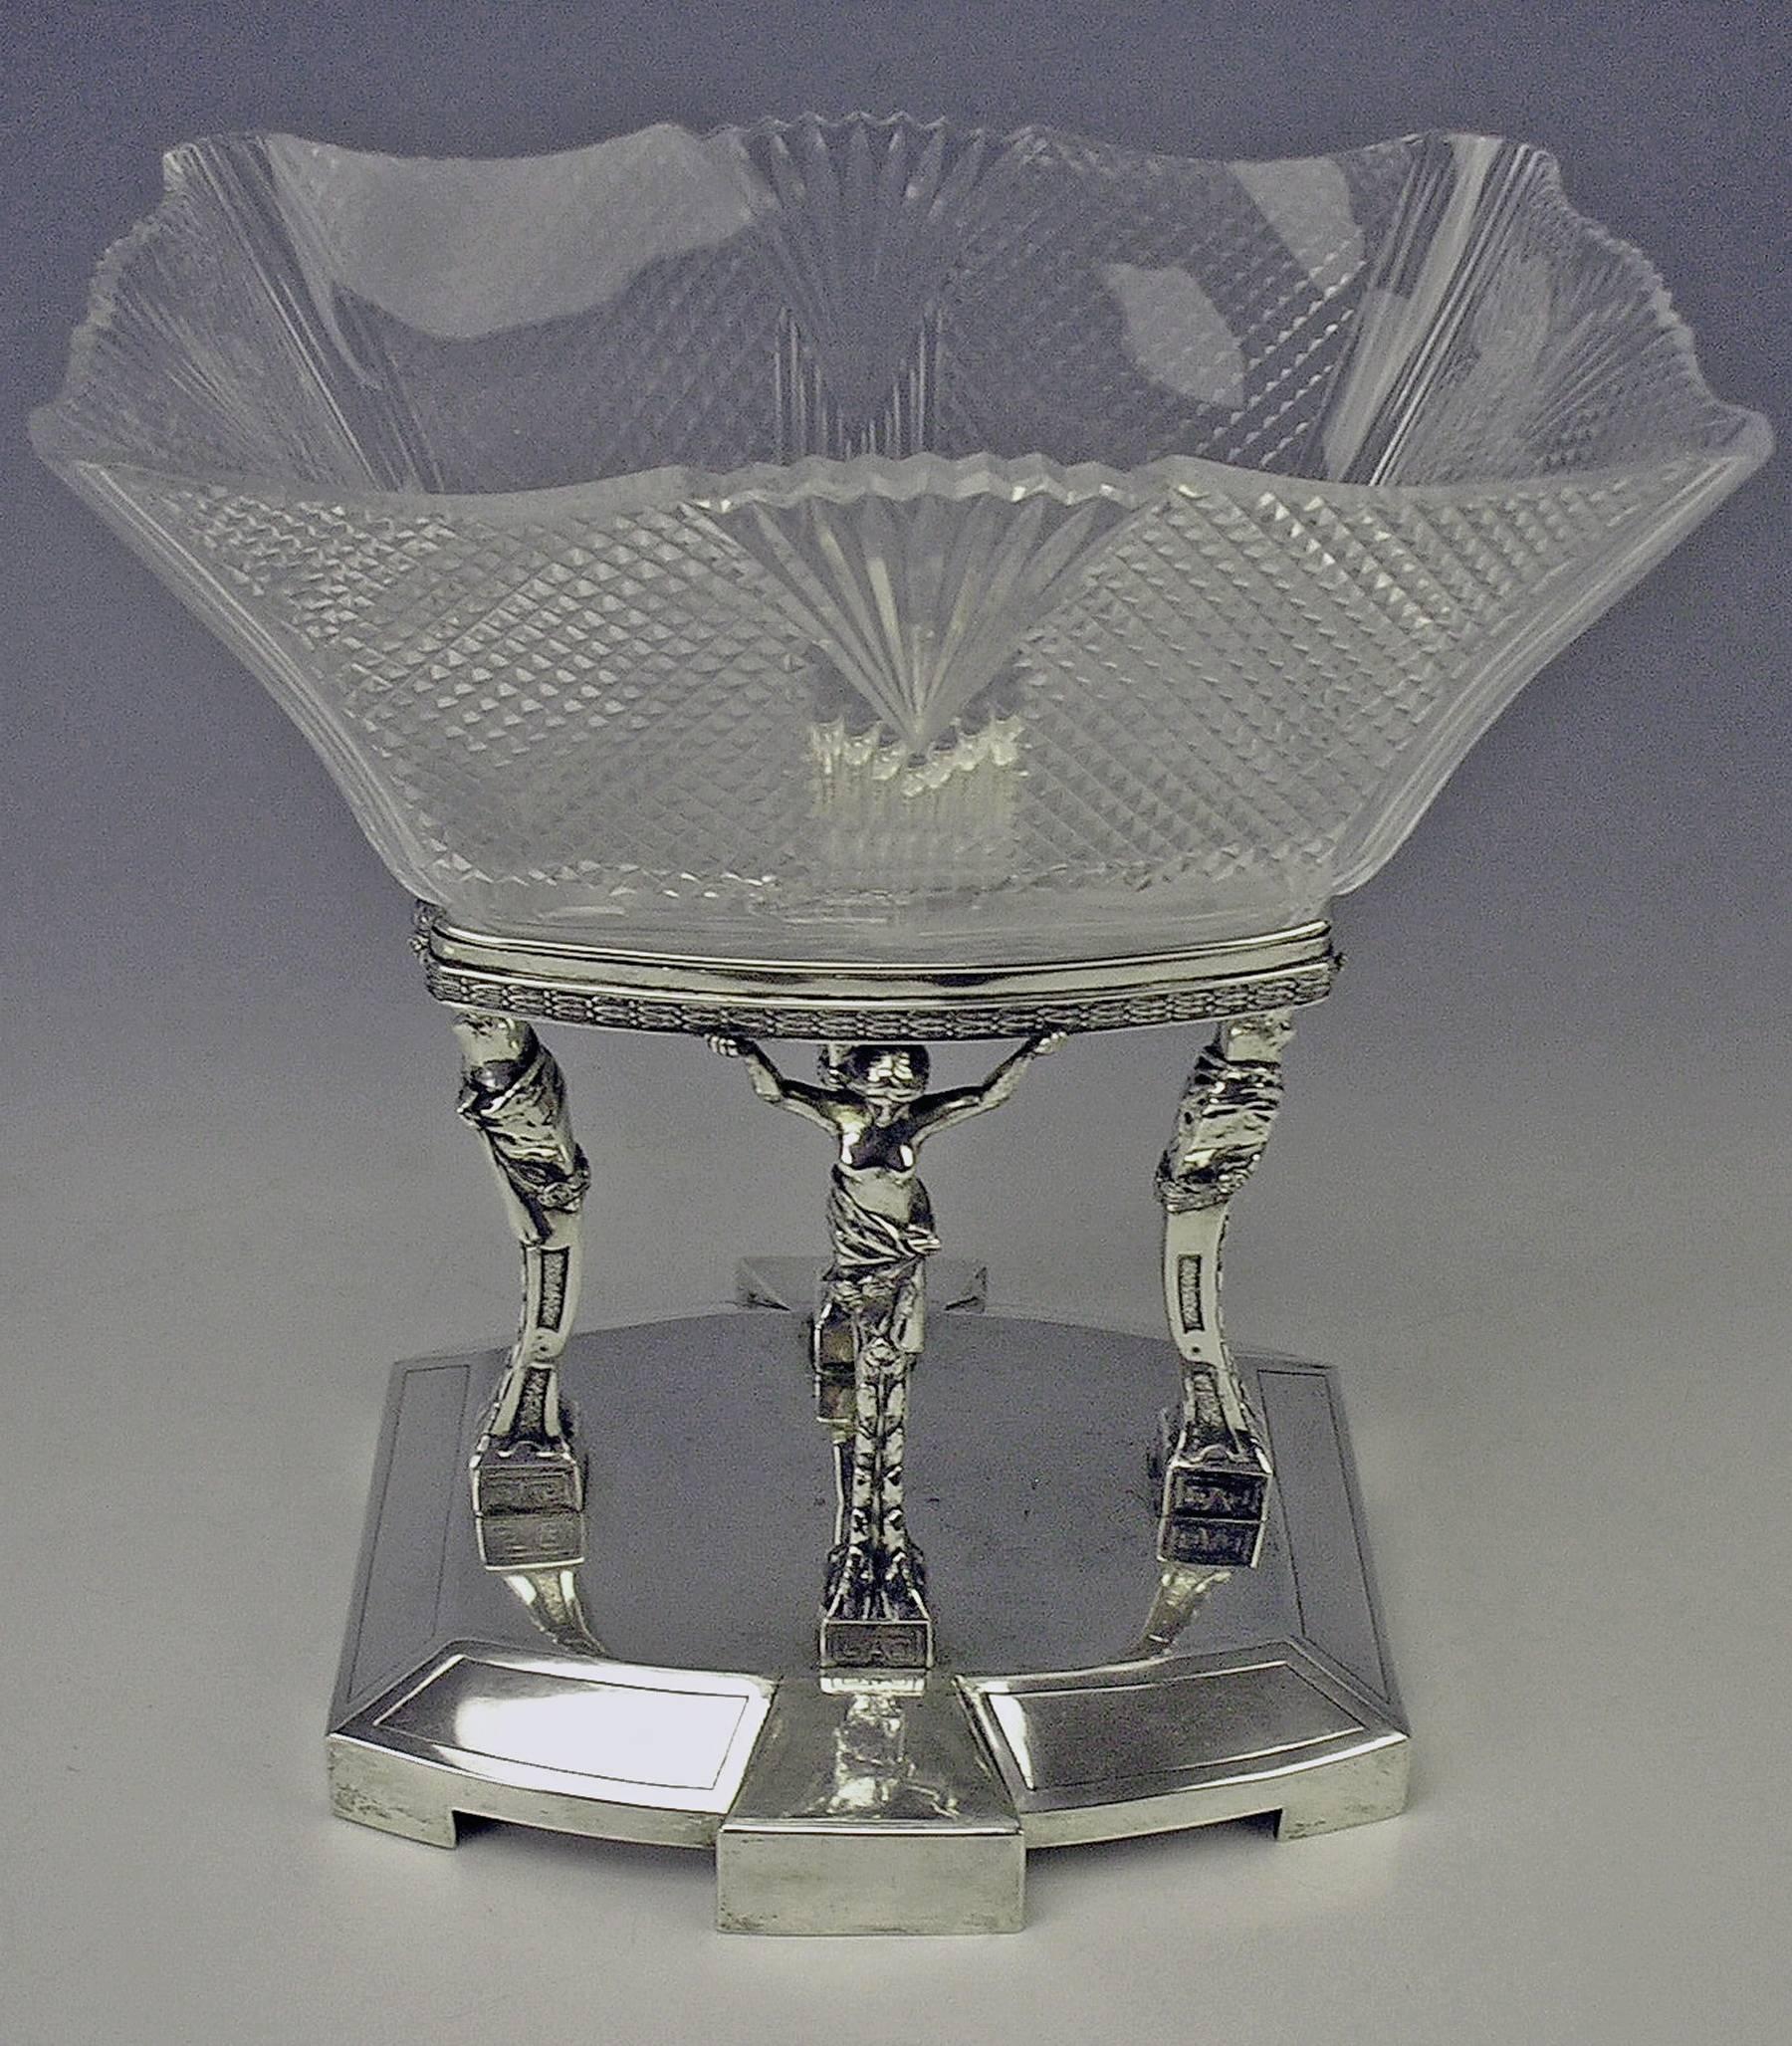 Silver antique Art Nouveau nicest and tall centrepiece with gorgeous glass bowl, manufactured in old imperial Austria (Prague).

Dating: circa 1900-1905

Silver 800 (hallmarked by old imperial Austrian stamp 1872-1922, So-said Diana's head mark,